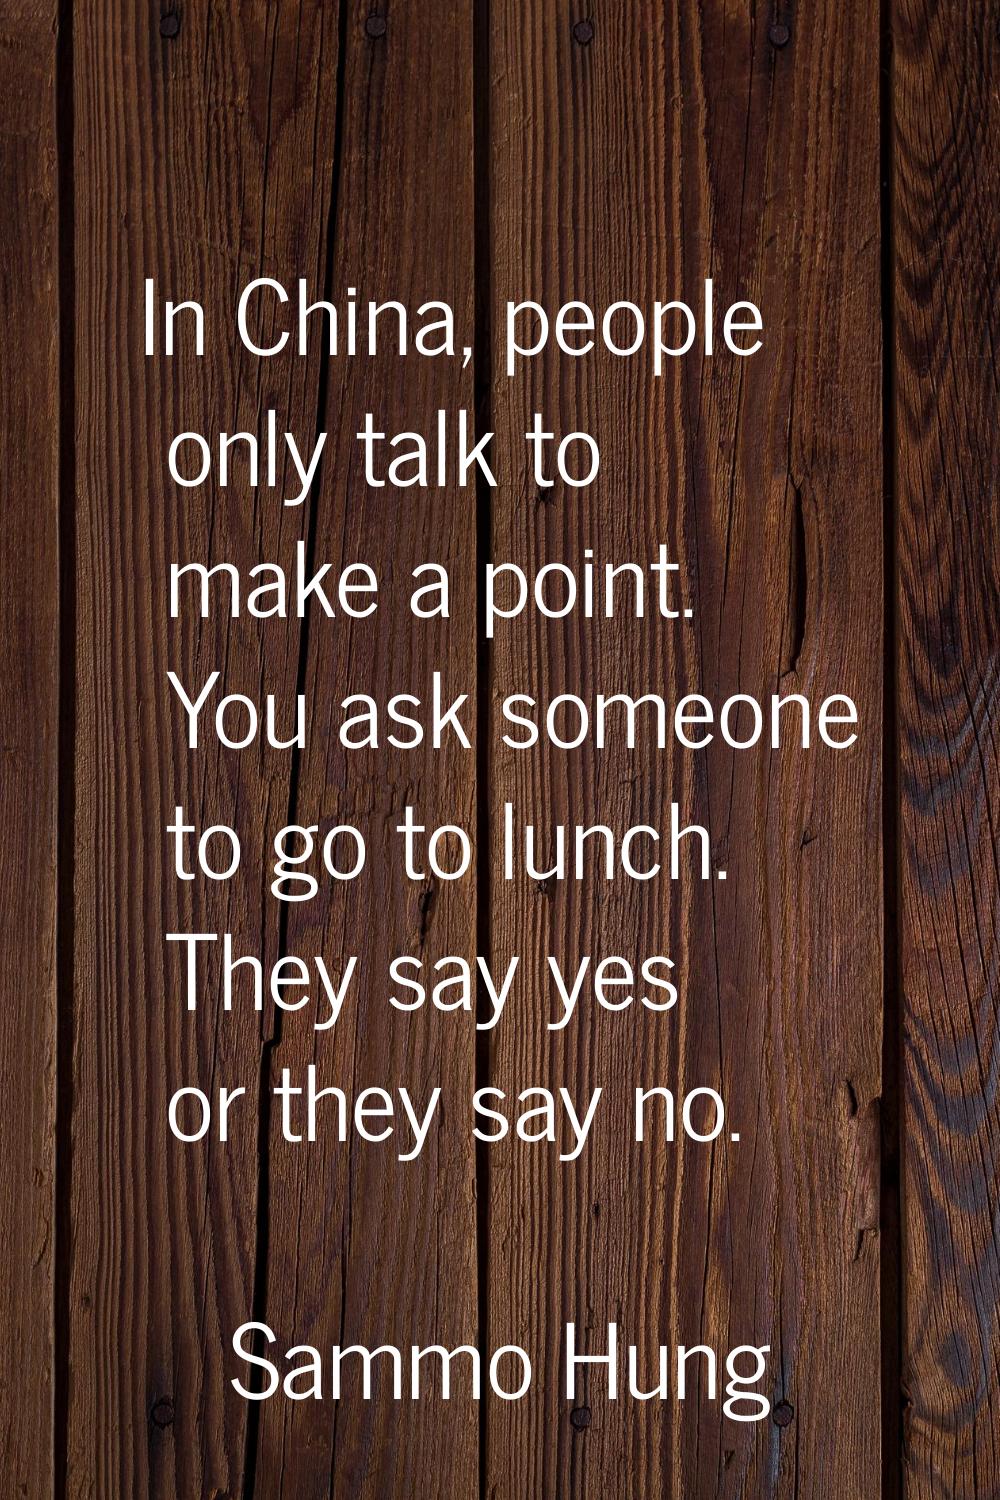 In China, people only talk to make a point. You ask someone to go to lunch. They say yes or they sa